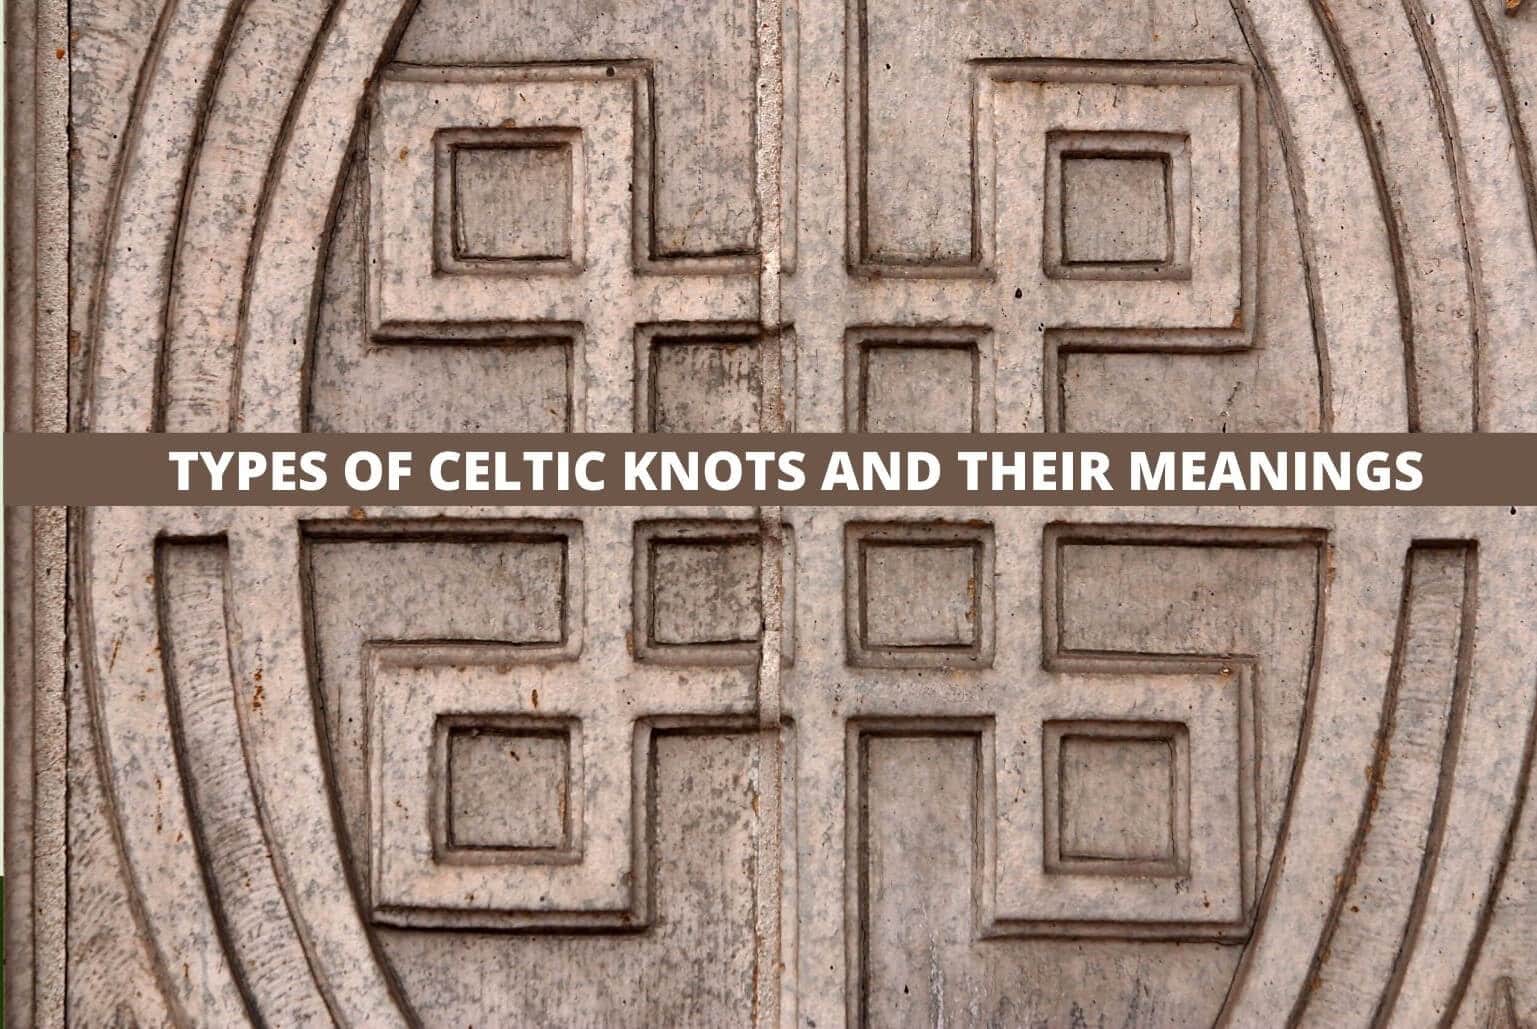 Types and meanings of celtic knots